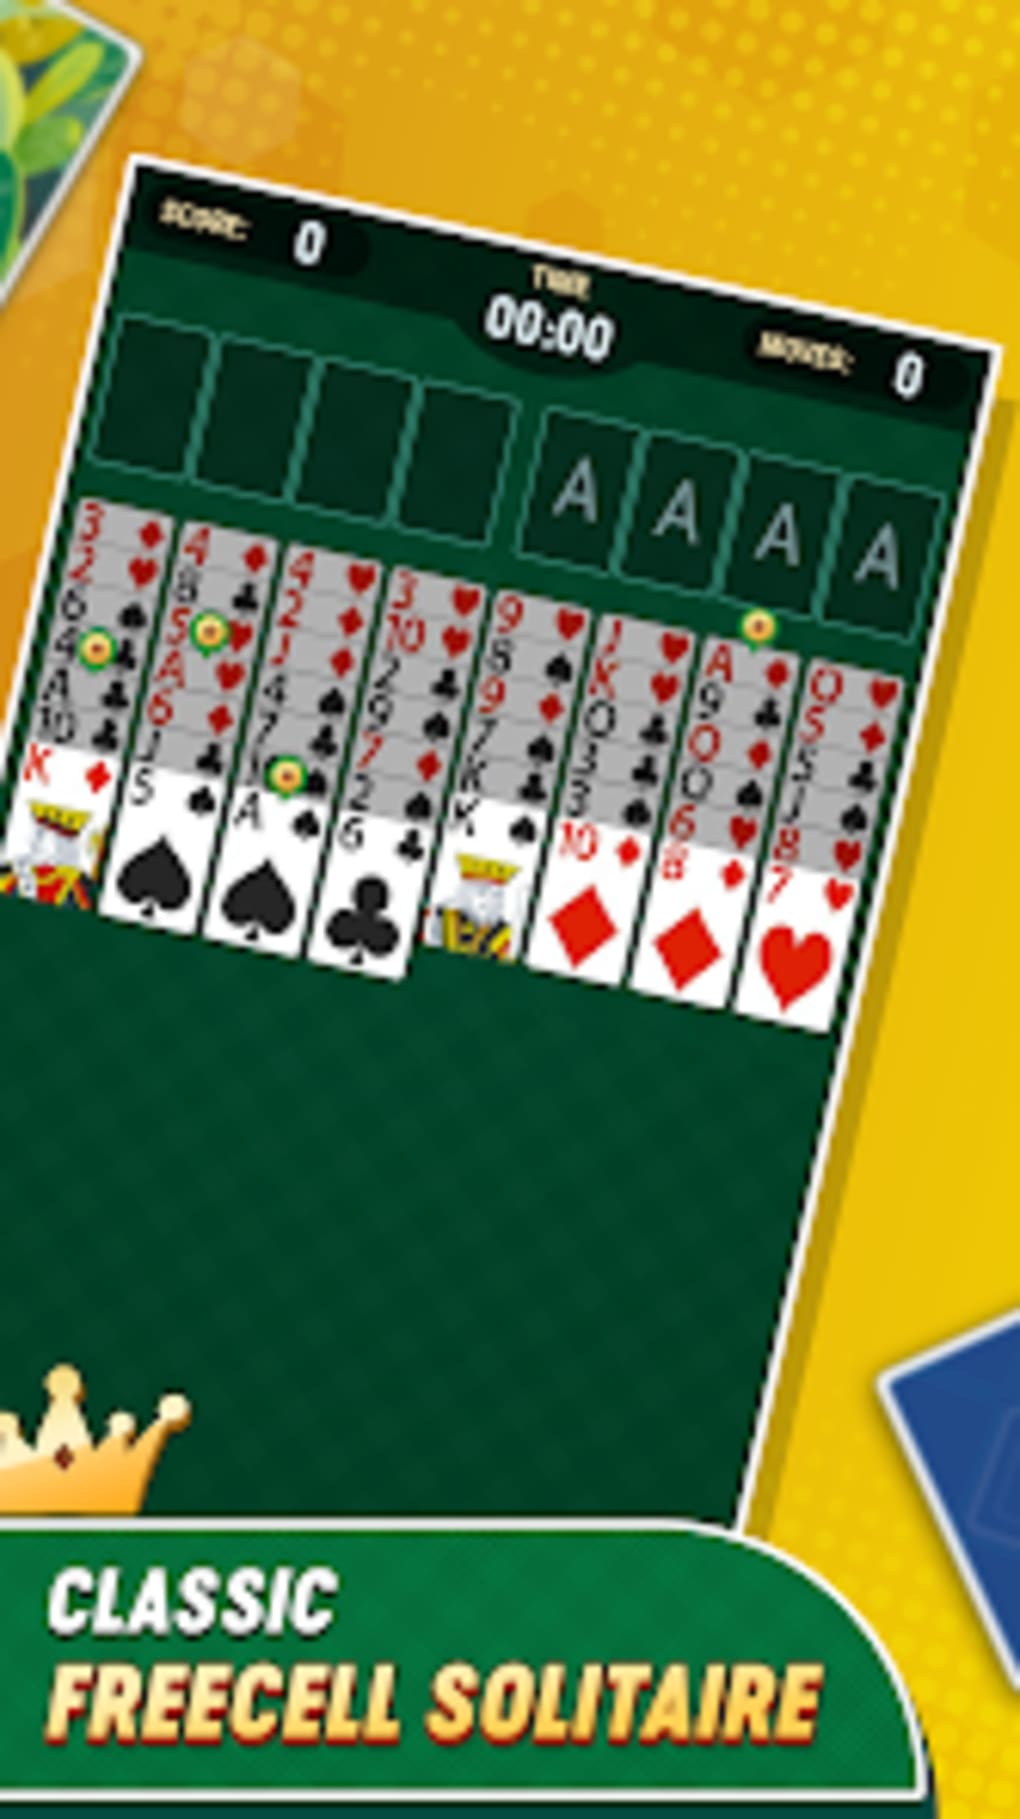 FreeCell Solitaire: Classic para Android - Download